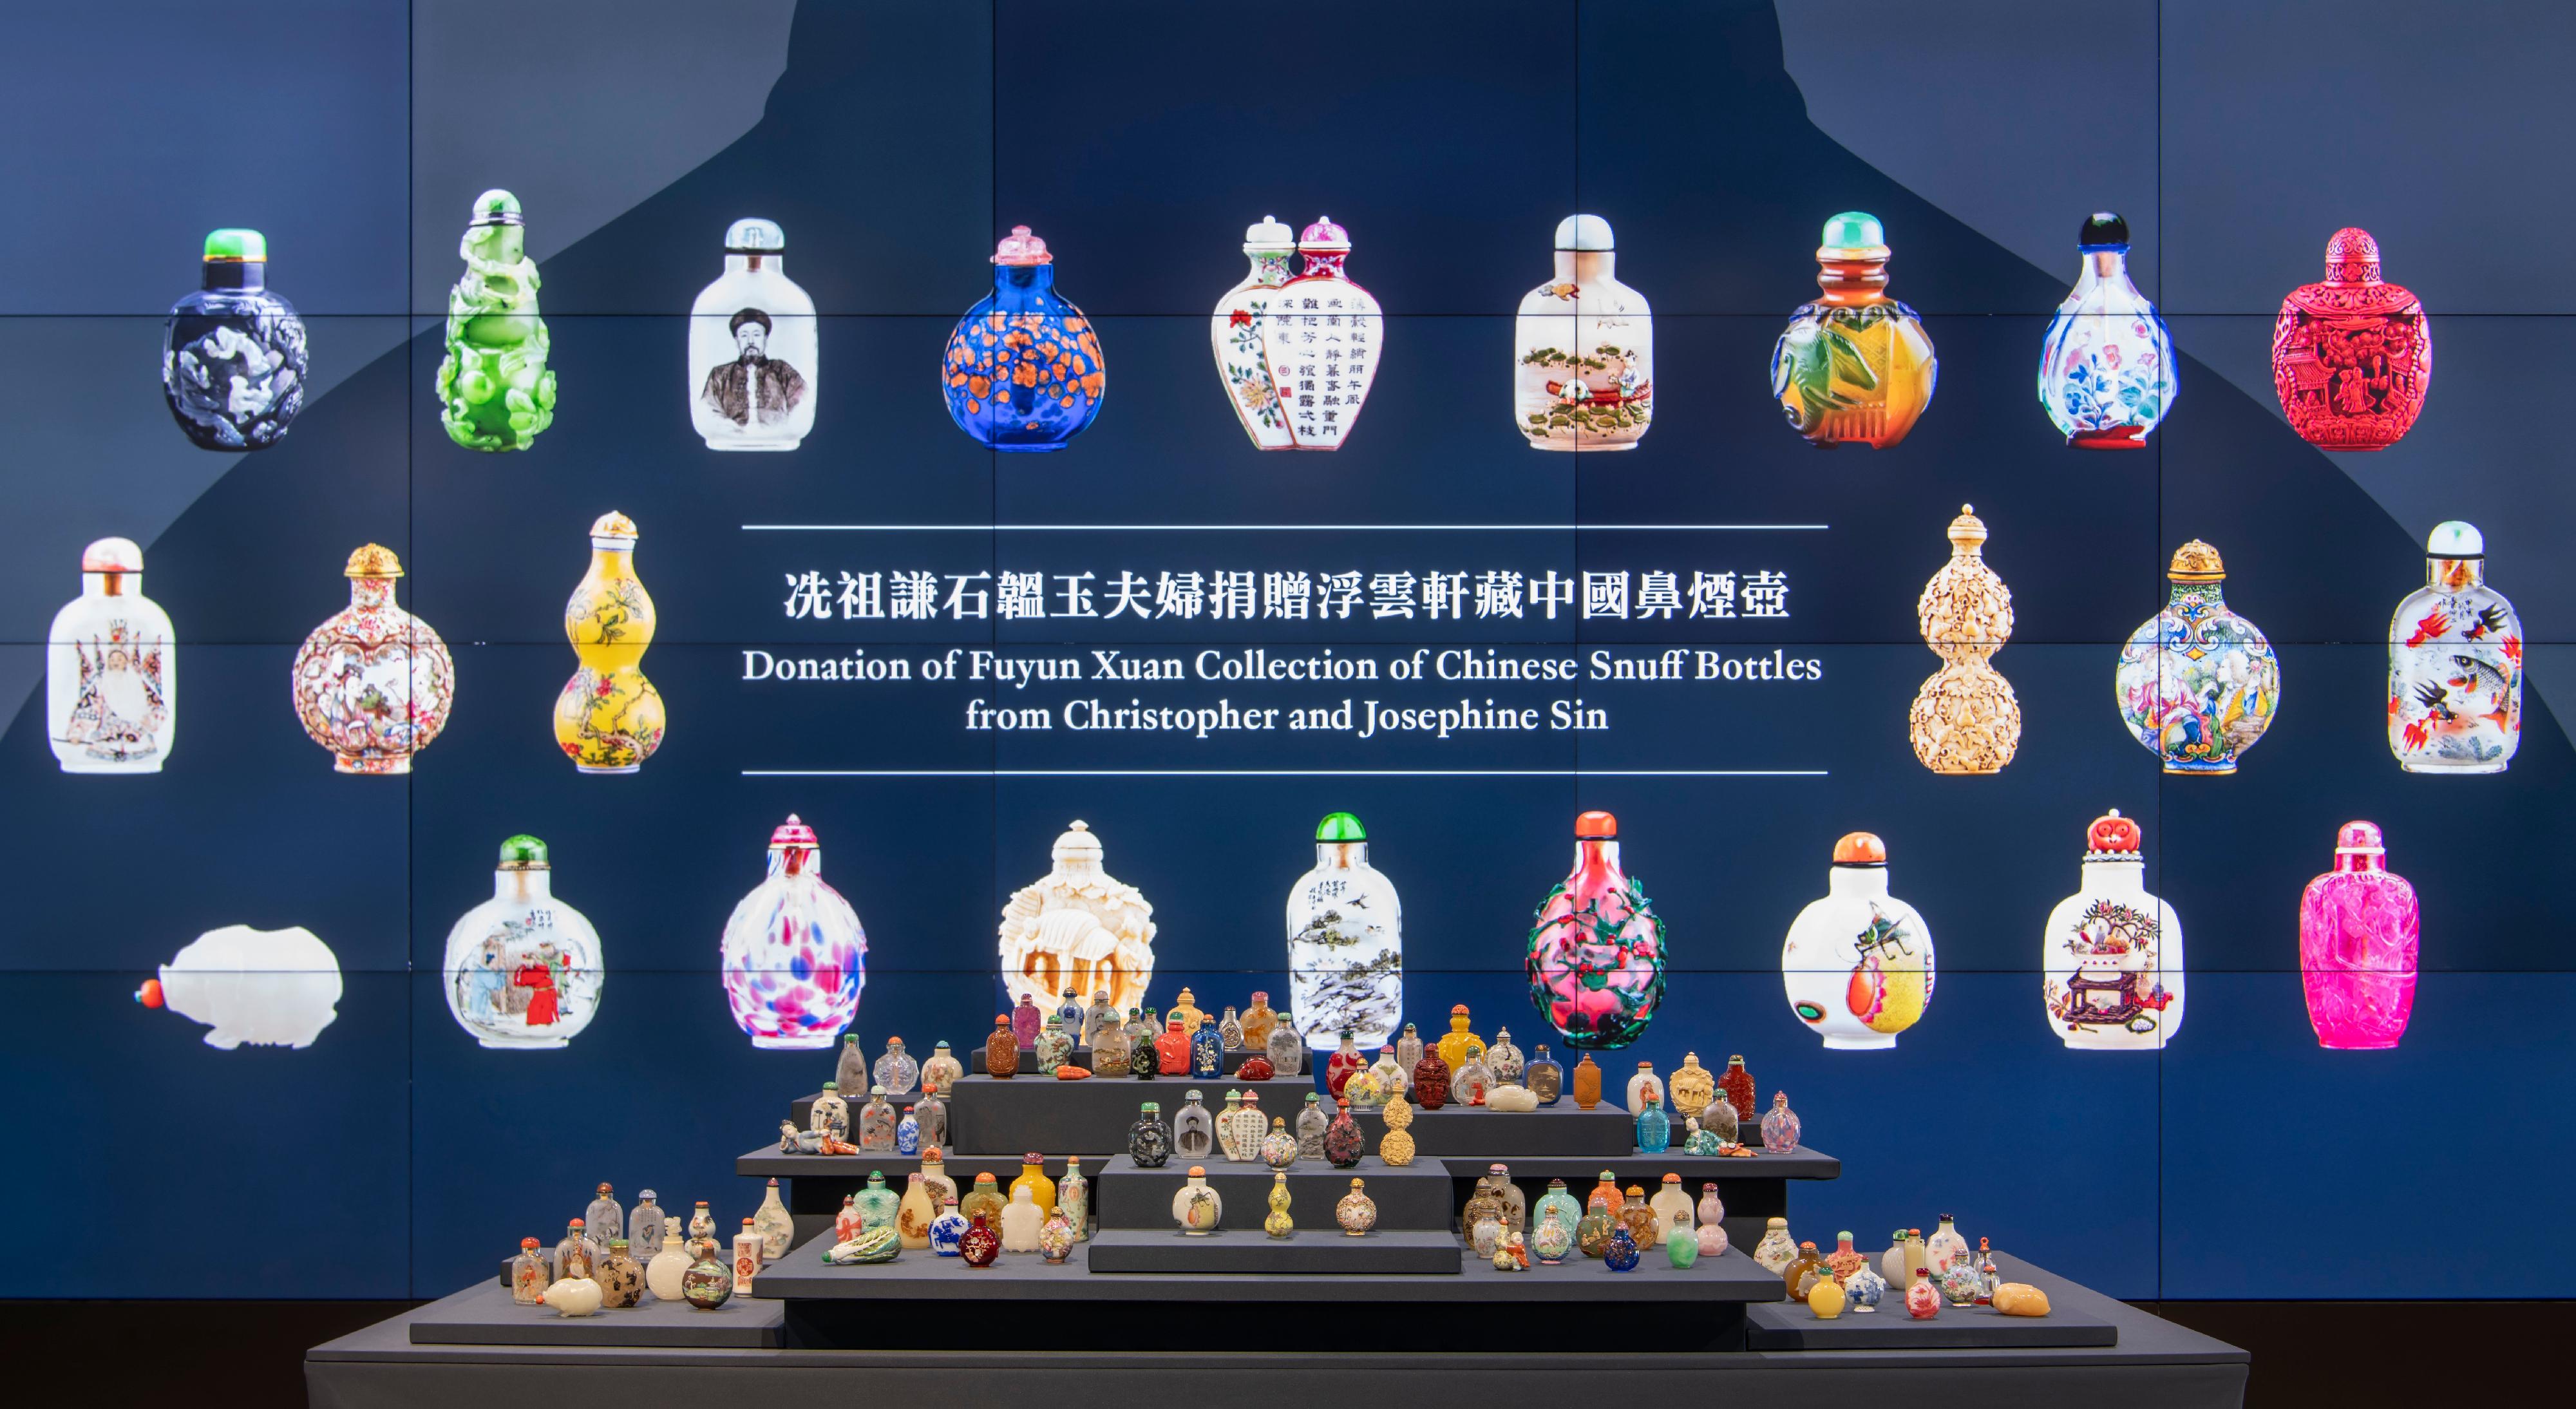 The Hong Kong Museum of Art today (September 28) announced that Christopher and Josephine Sin generously donated nearly 500 pieces of Chinese snuff bottles from the Fuyun Xuan Collection of Chinese Snuff Bottles for the museum's permanent collection. This donation stands as the most extensive and comprehensive of its kind ever received by a museum in Hong Kong.
